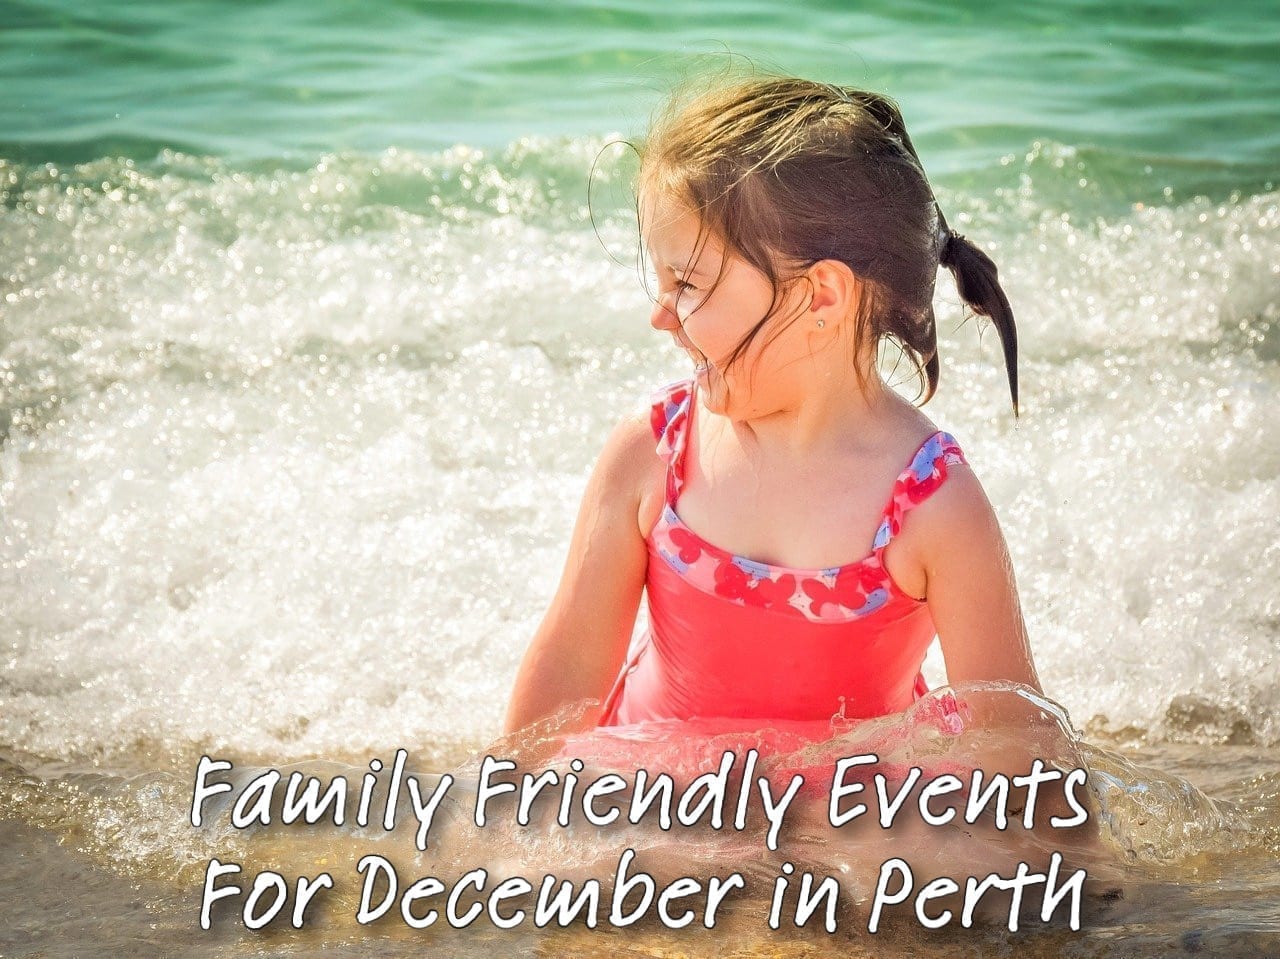 December Family Friendly Events in Perth